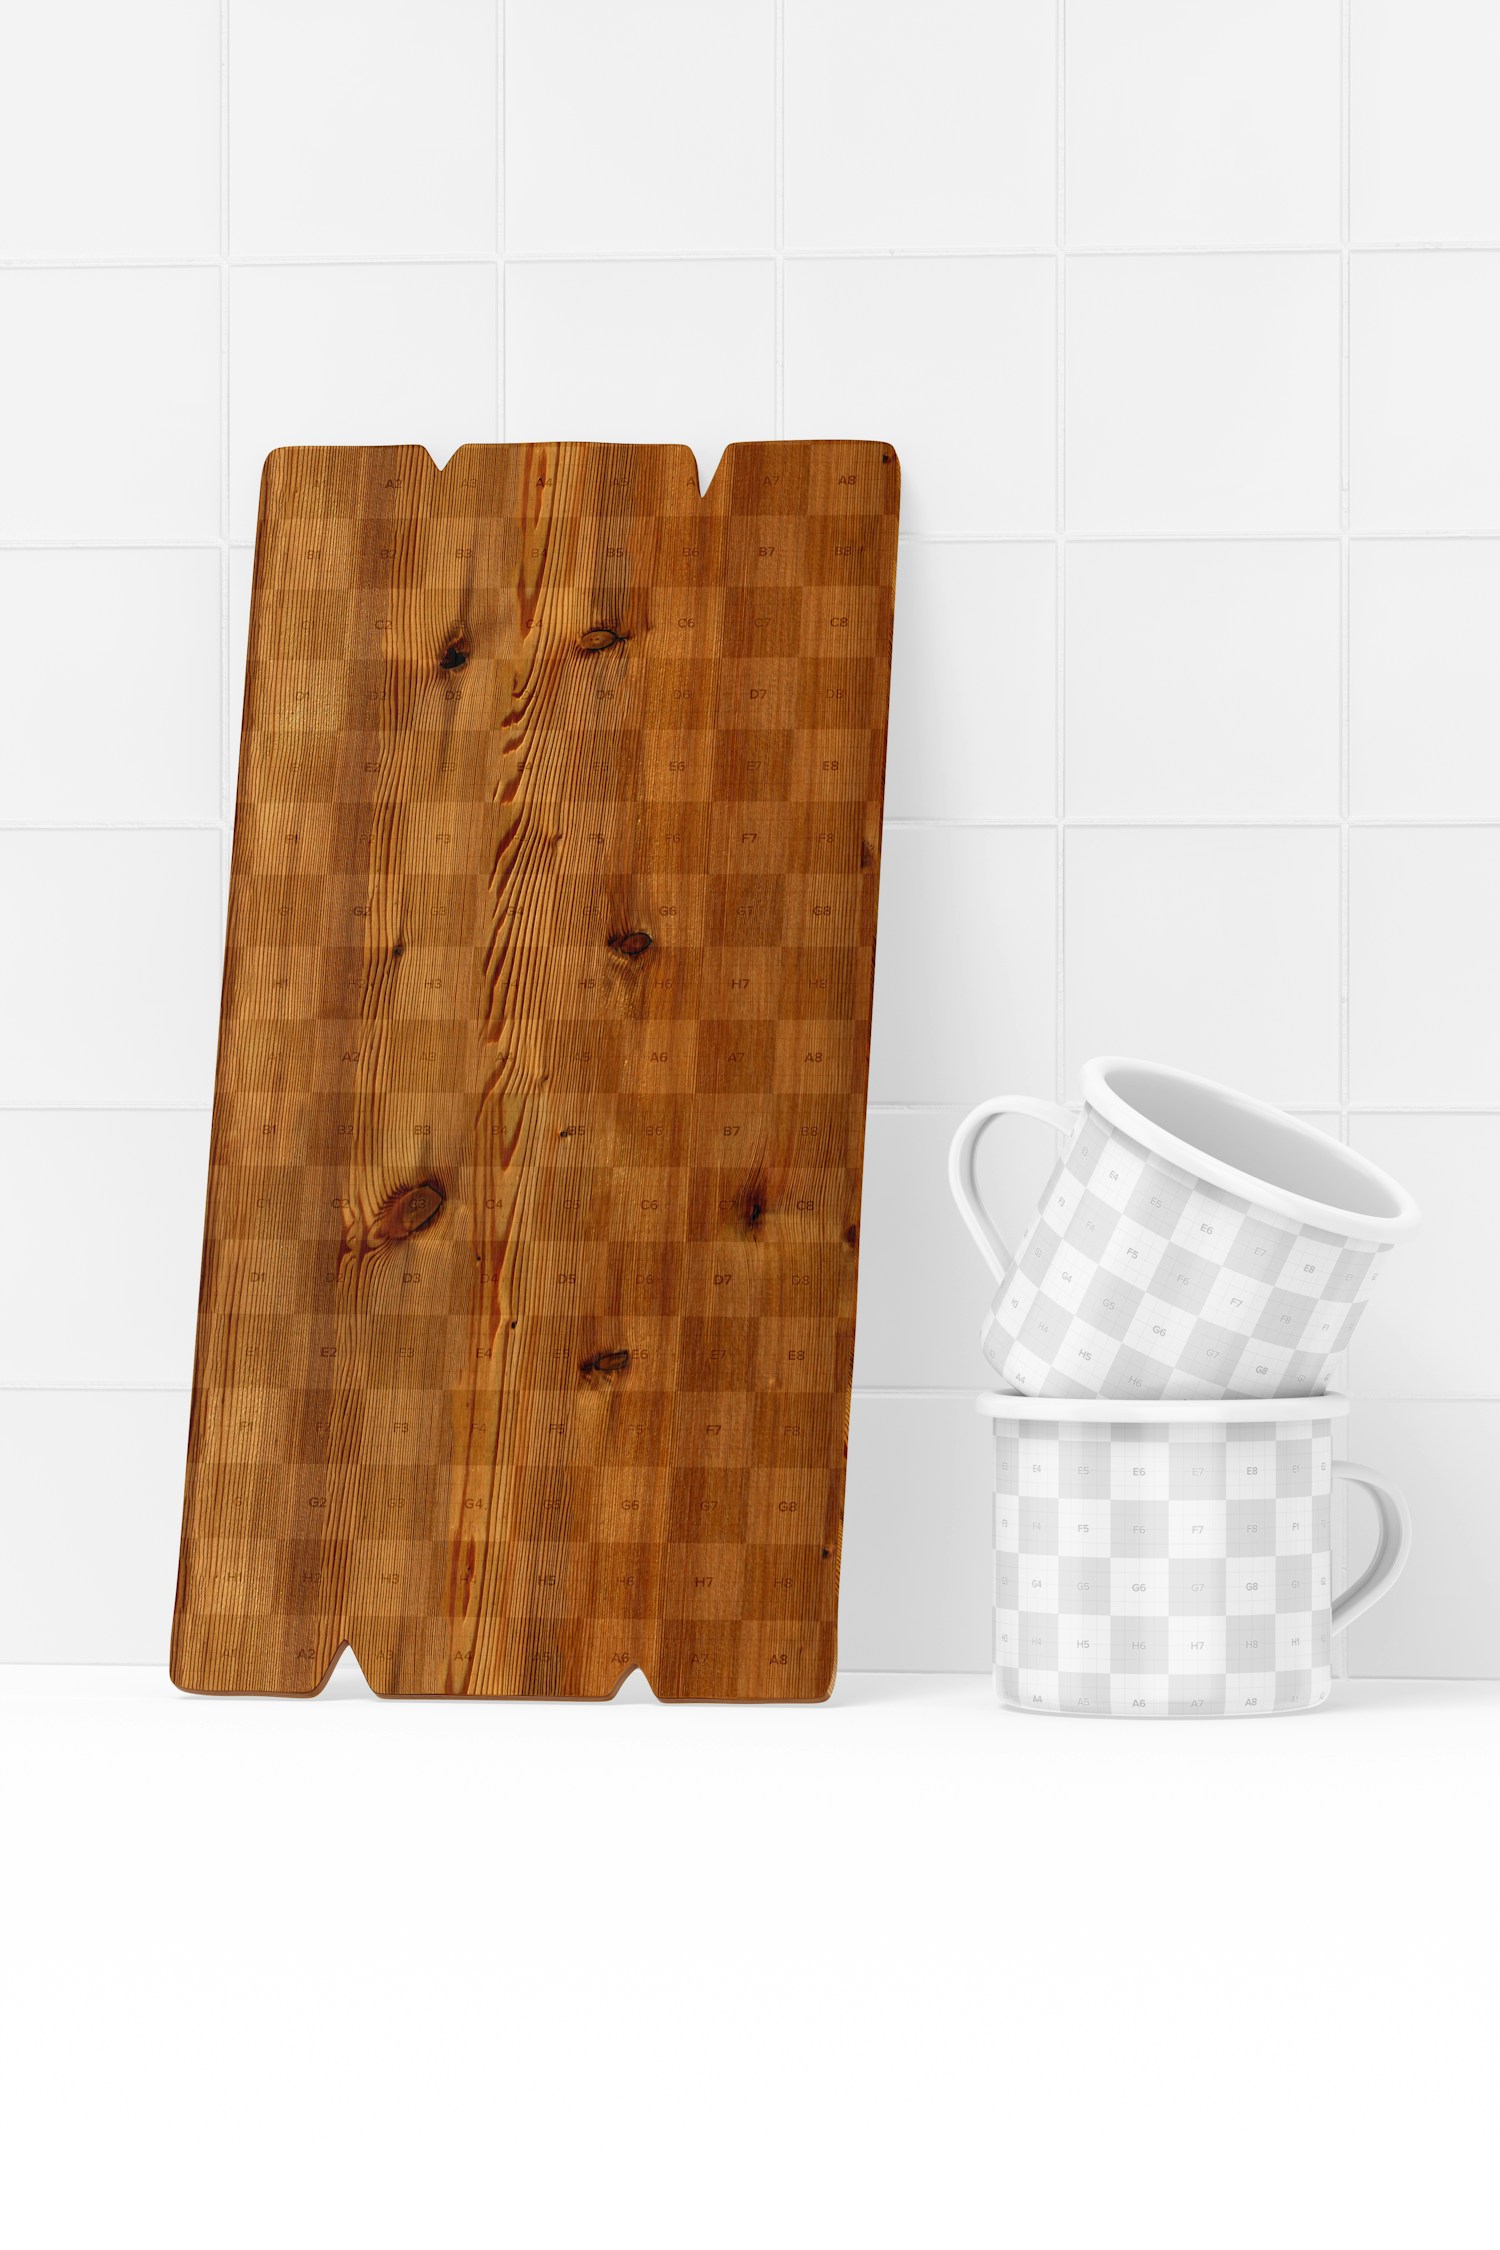 Wooden Home Decor Sign with Mugs Mockup